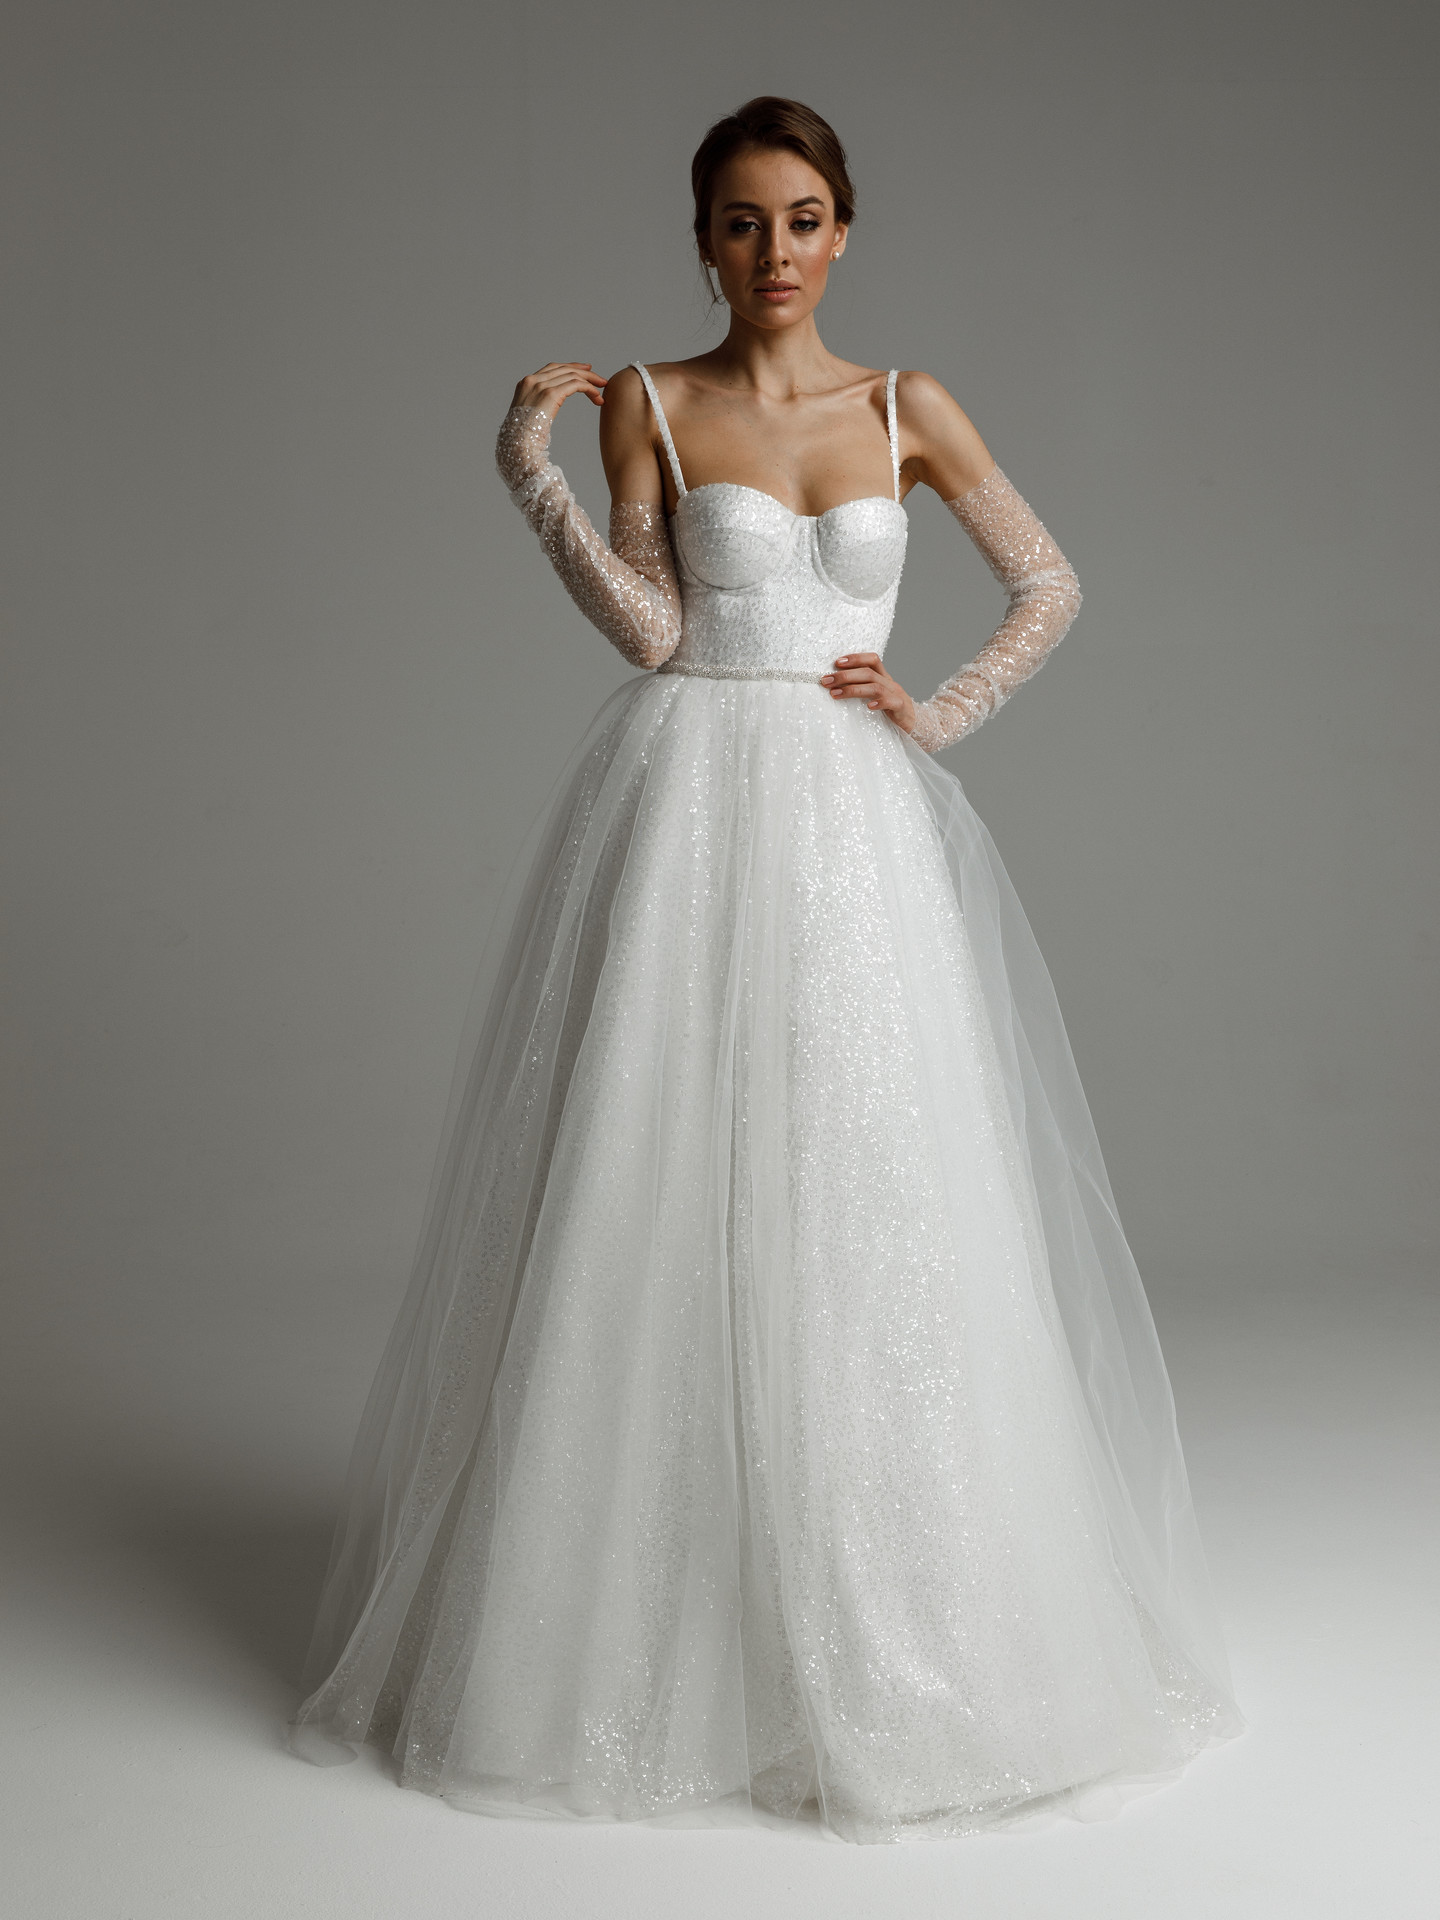 Avril gown, 2021, couture, dress, bridal, off-white, Avril, A-line, embroidery, lacing corset